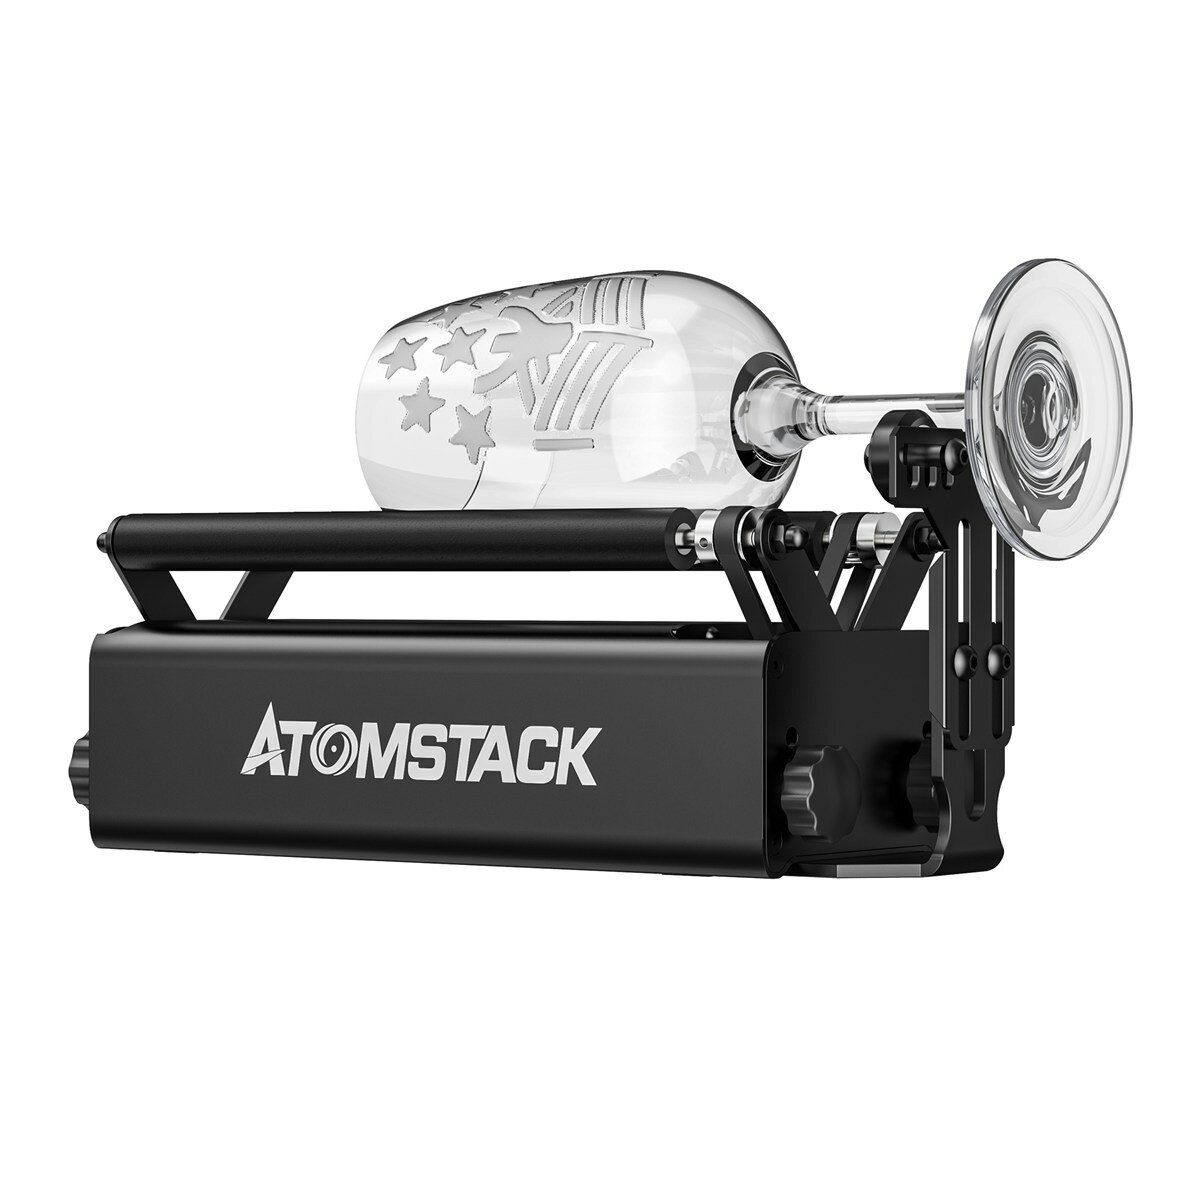 [CZ/US DIRECT] Atomstack Upgraded R3 Pro Rotary Roller with Separable support module and Extension Towers